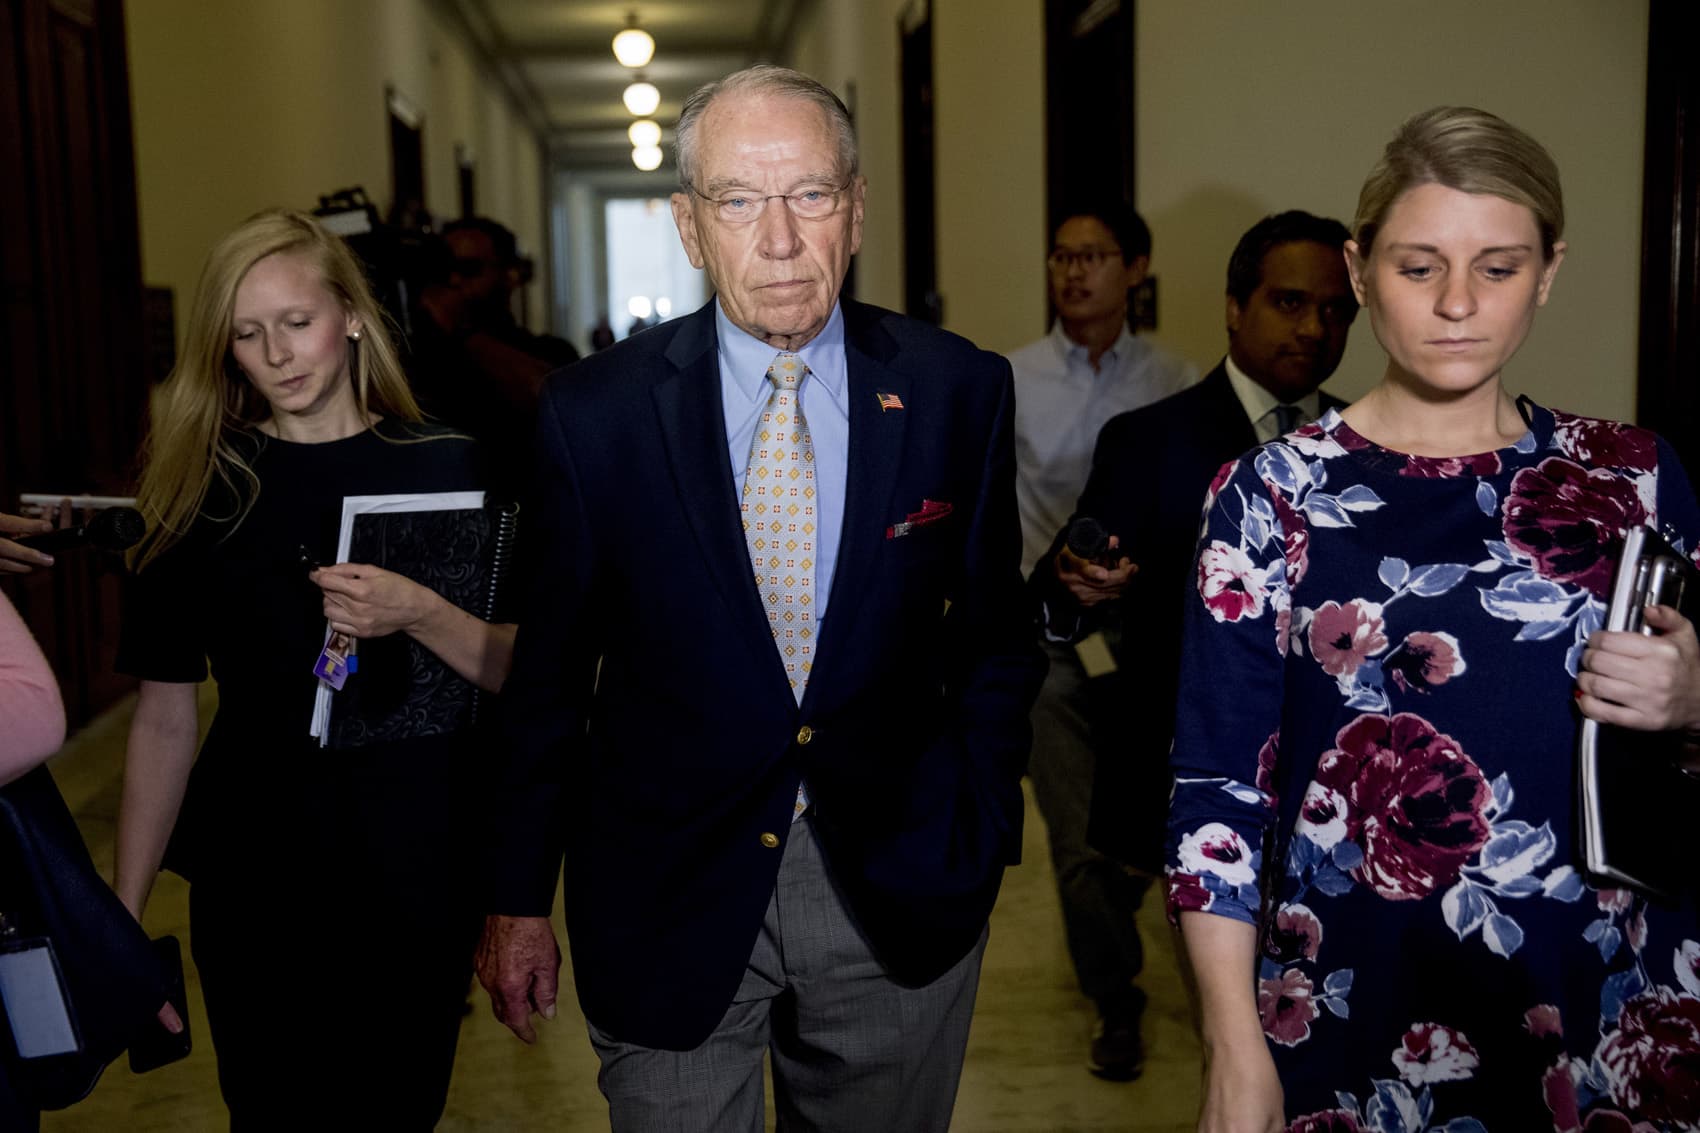 Senate Judiciary Committee Chairman Chuck Grassley, R-Iowa, departs after speaking to reporters on Capitol Hill, Wednesday, Sept. 19, 2018, in Washington. Christine Blasey Ford wants the FBI to investigate her allegation that she was sexually assaulted by Supreme Court nominee Brett Kavanaugh before she testifies at a Senate Judiciary Committee hearing next week. (AP Photo/Andrew Harnik)